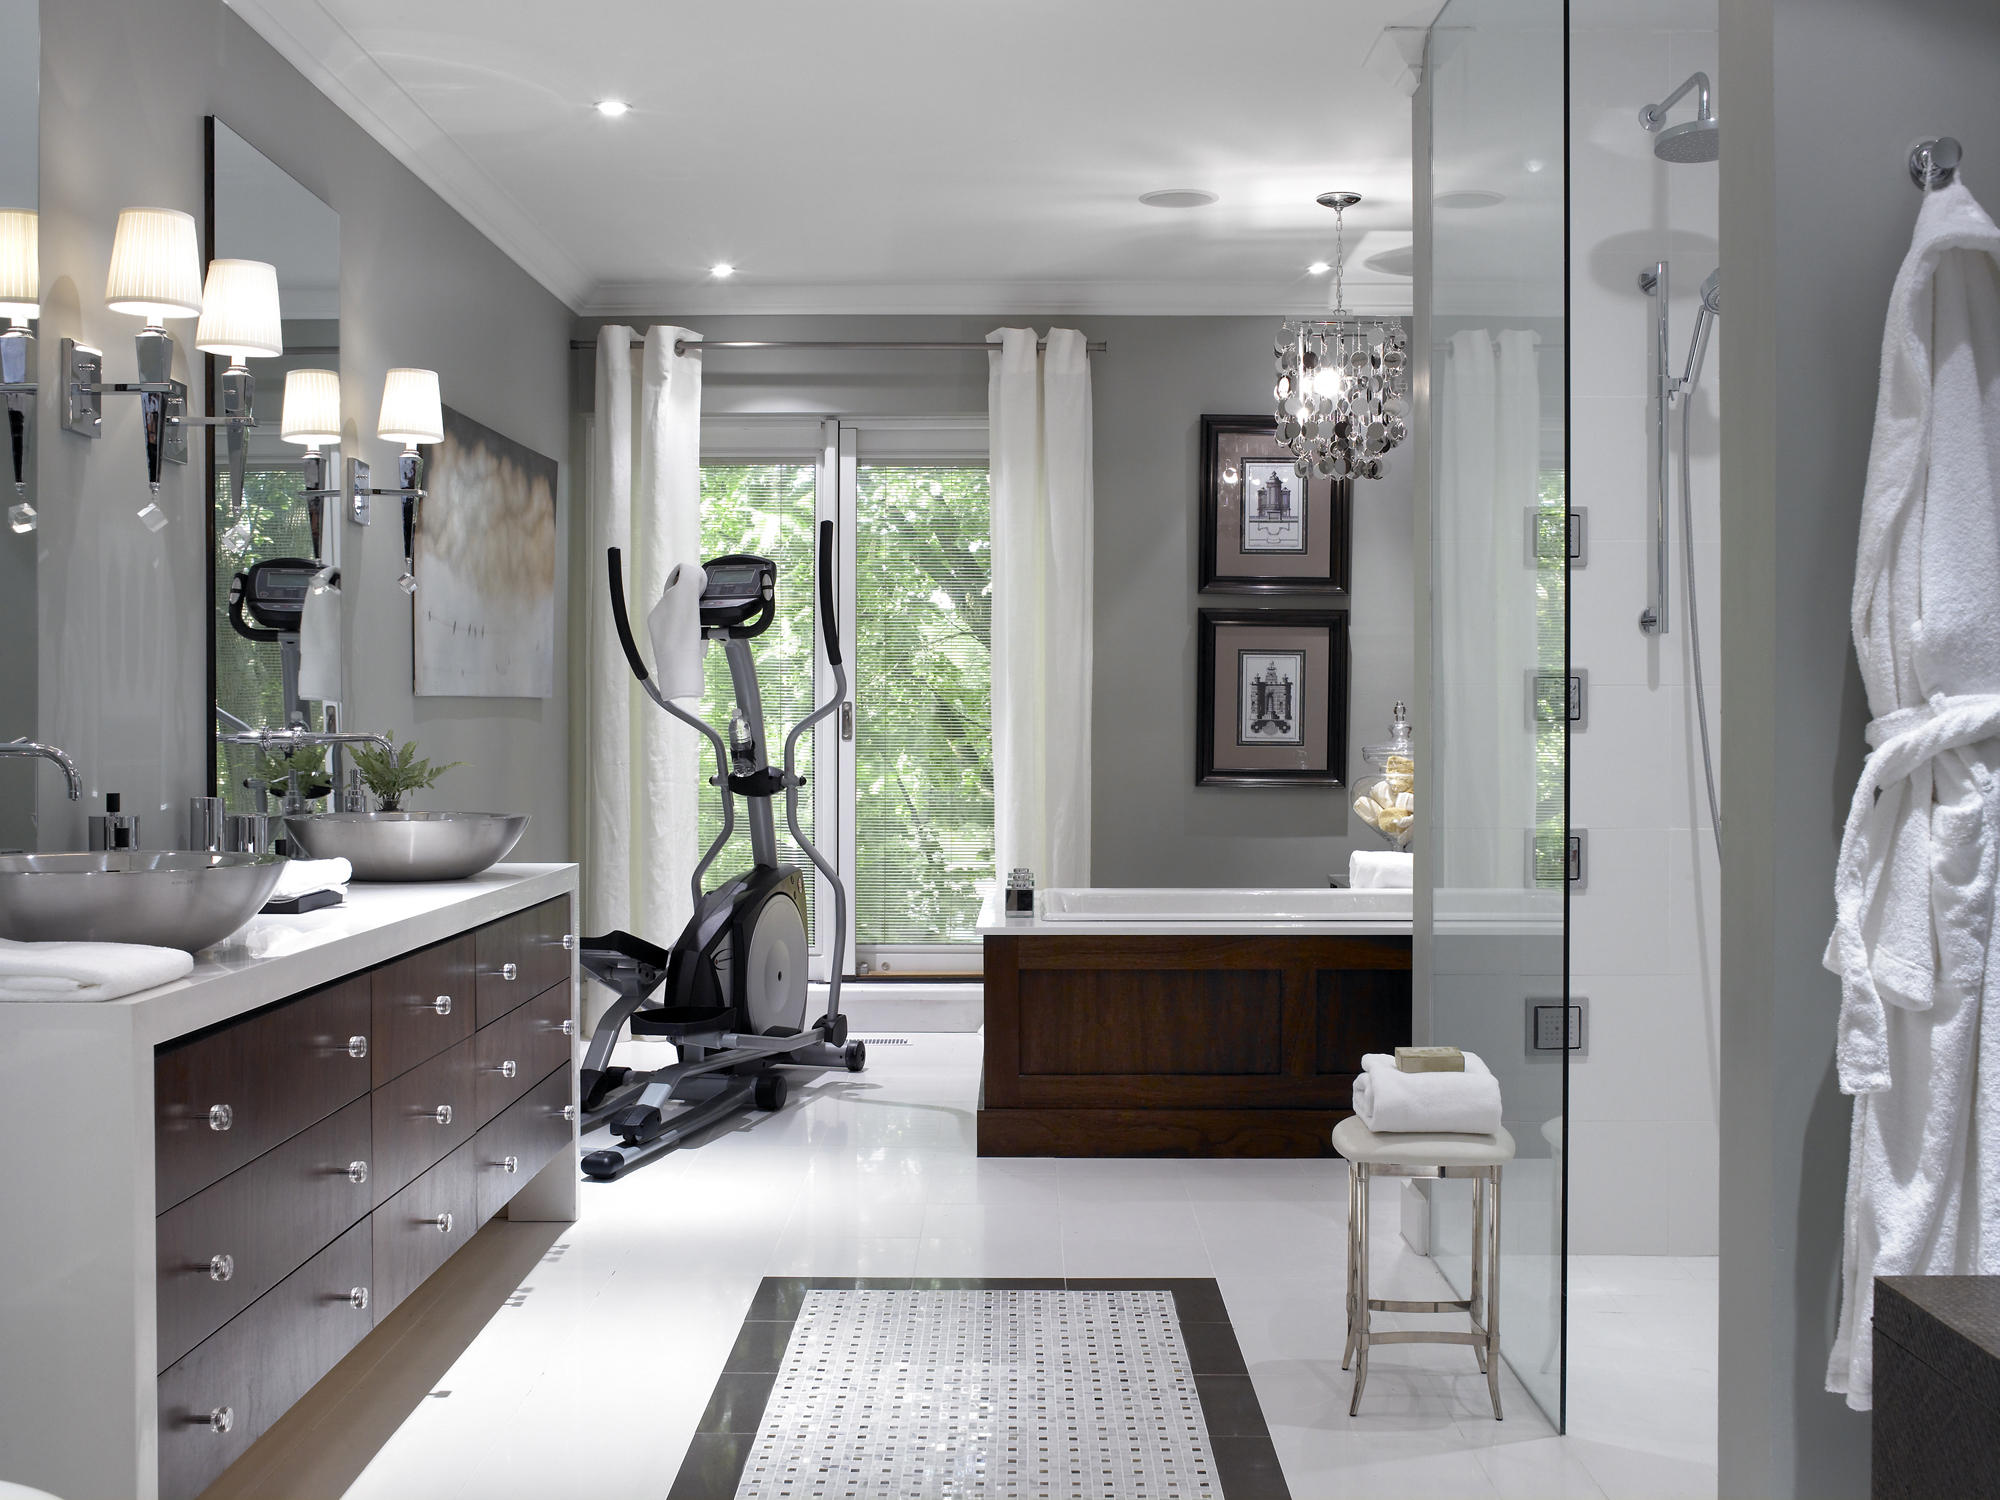 Hgtv bathroom ideas large and beautiful photos to select